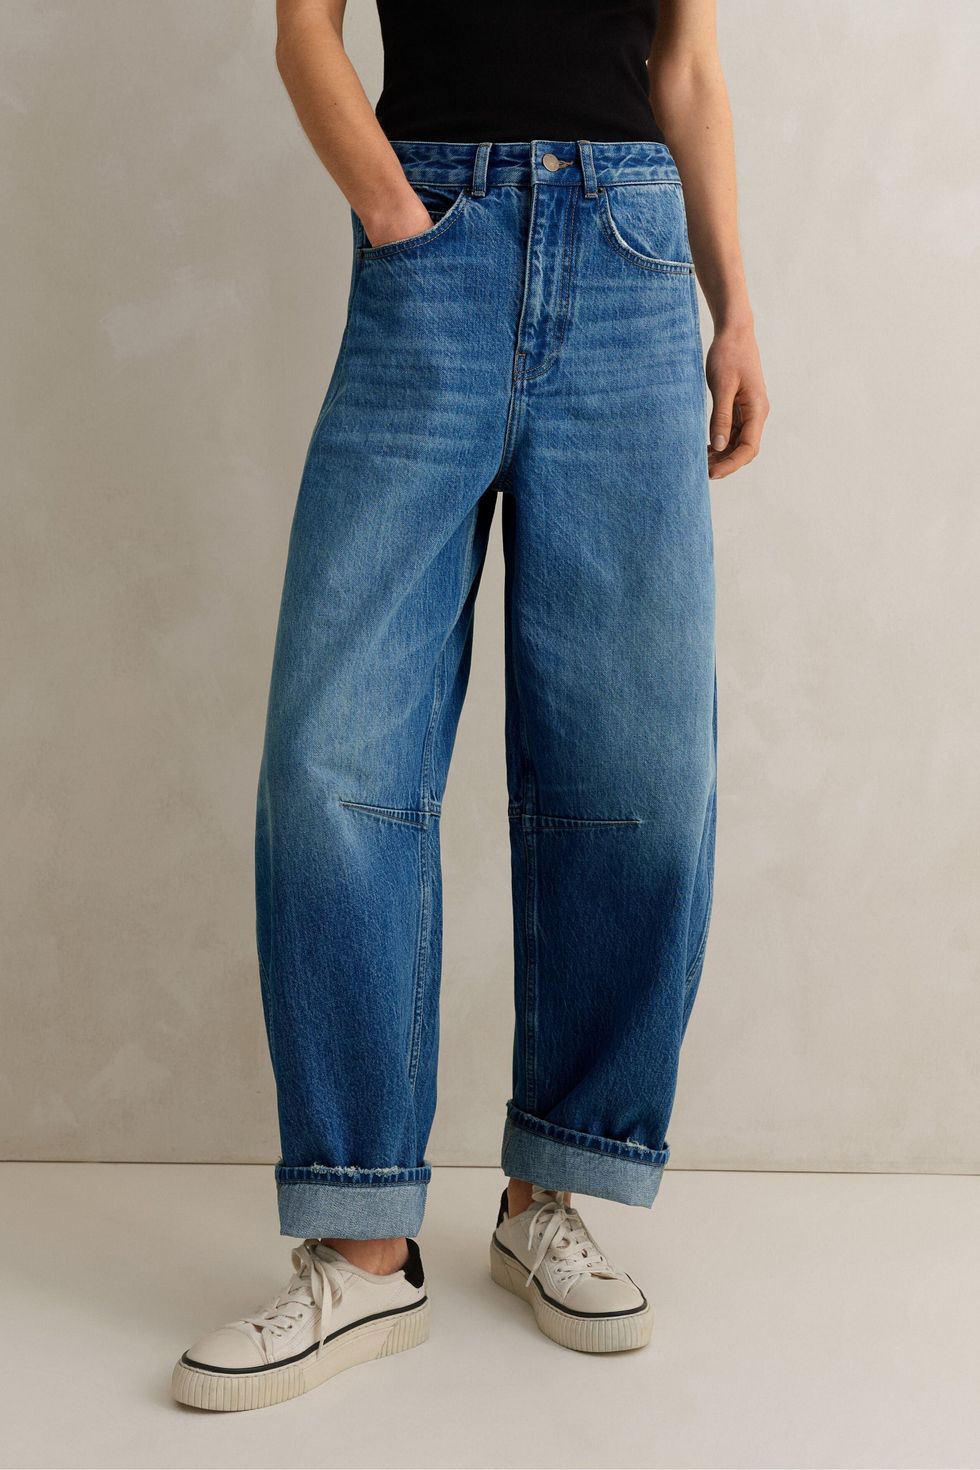 Barrel Jeans Are the Controversial Denim Trend That's Continuing to Divide  the Fashion Set